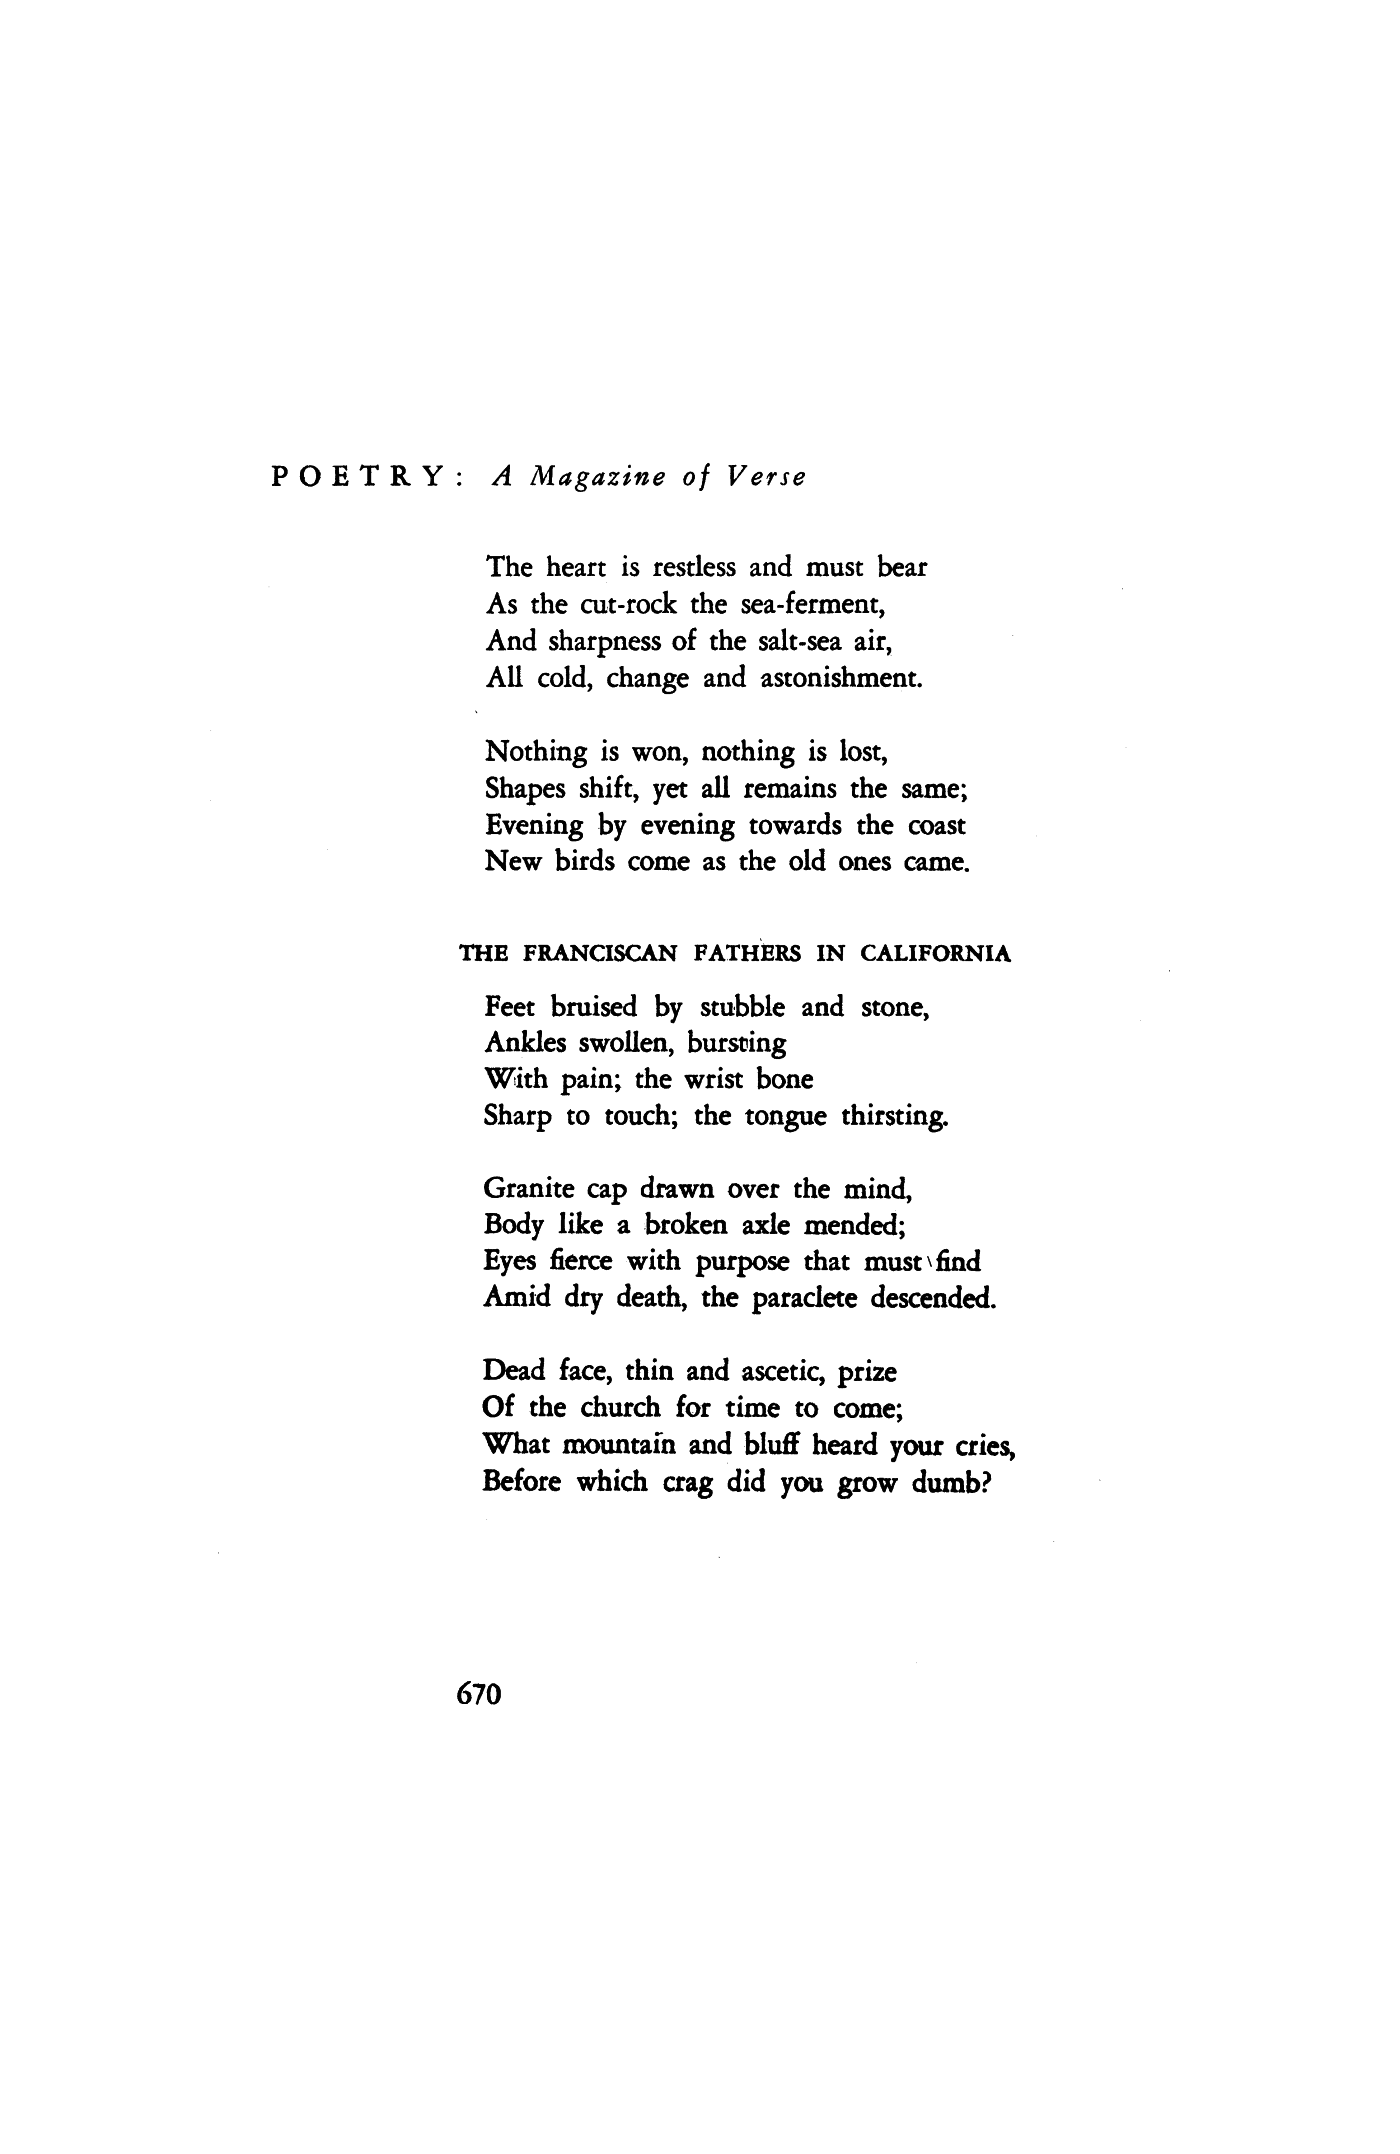 poems about cutting your wrist